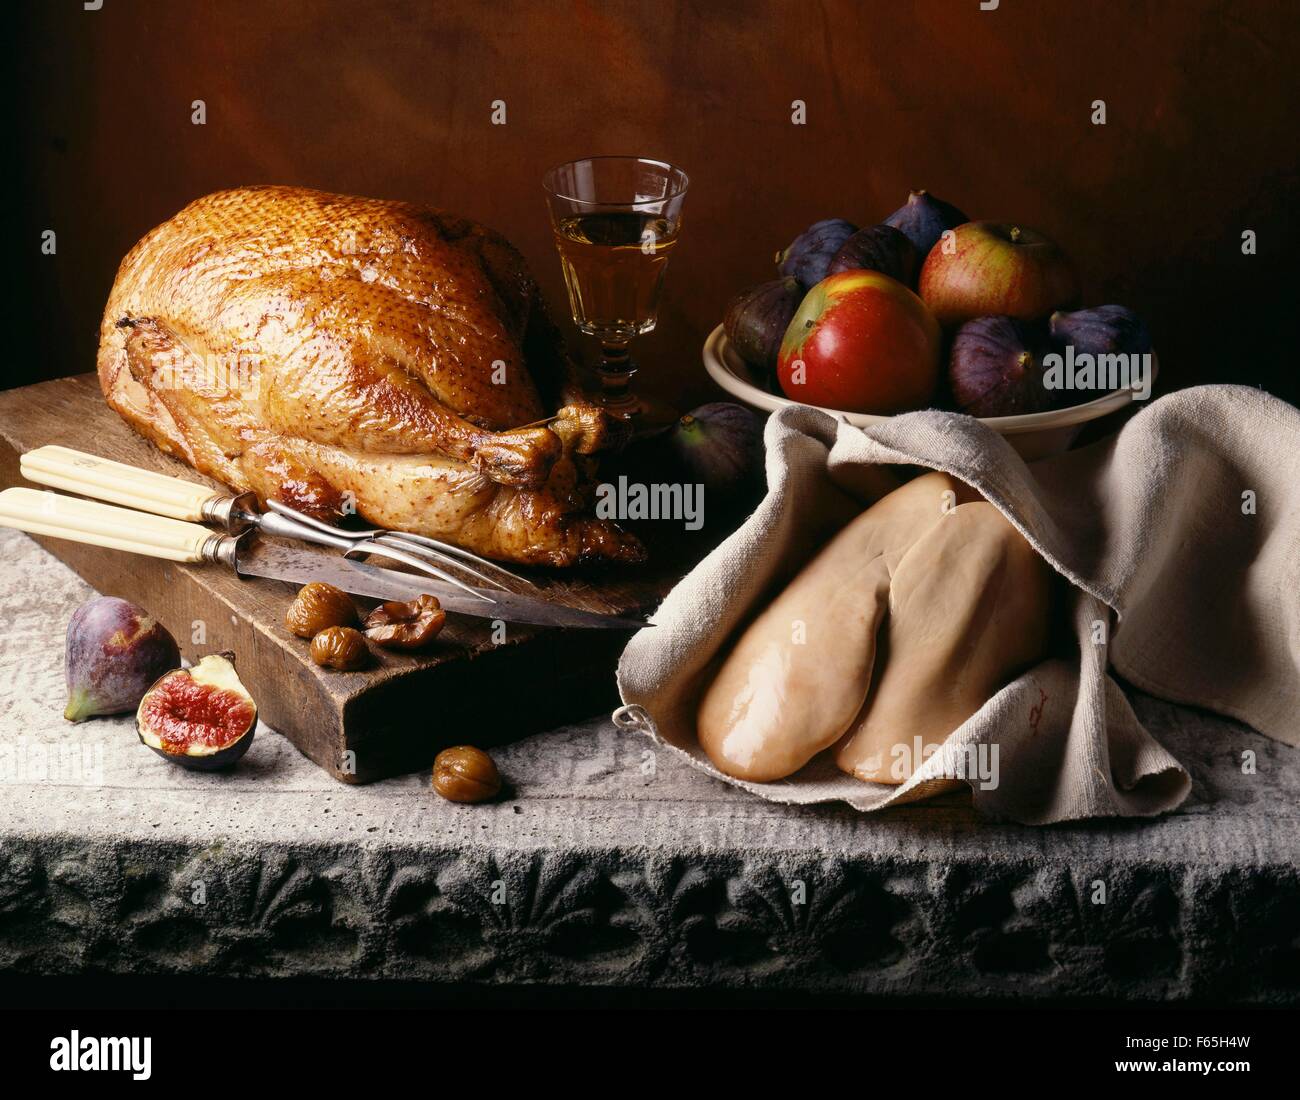 turkey and uncooked foie gras Stock Photo